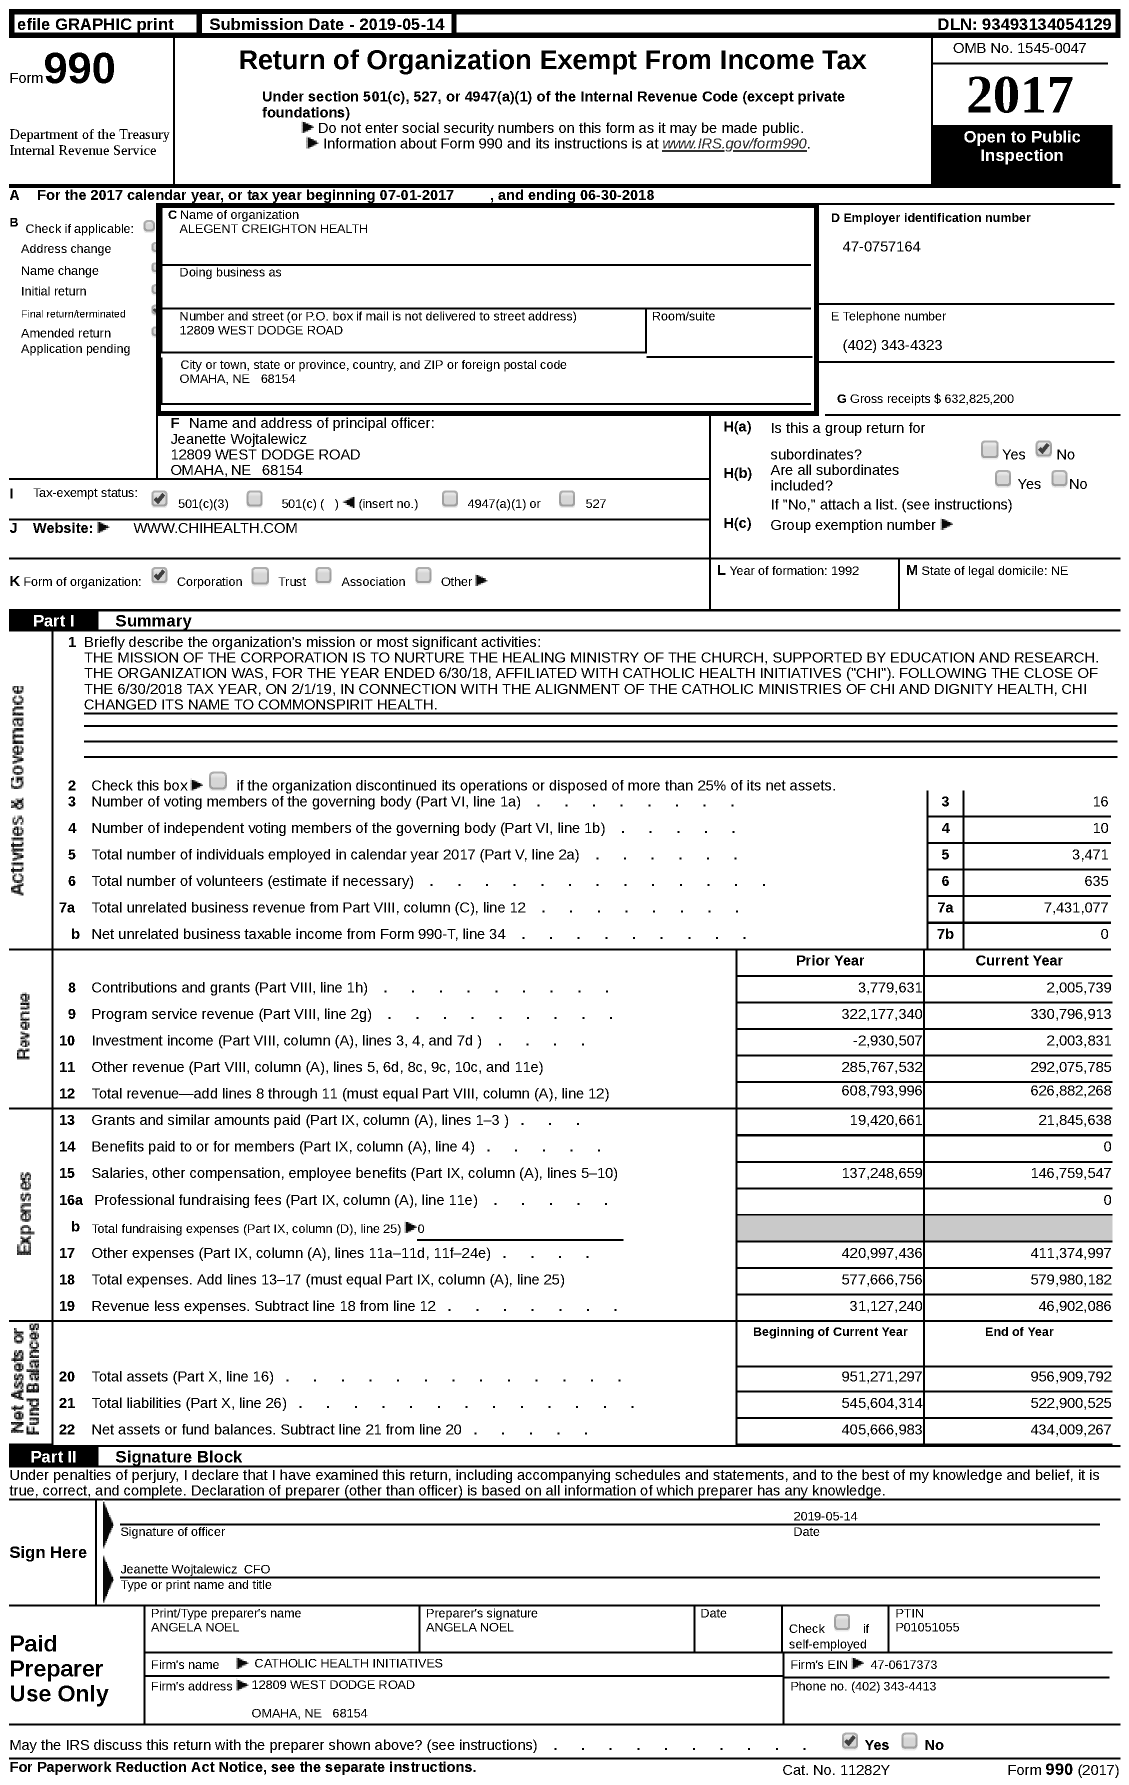 Image of first page of 2017 Form 990 for Alegent Creighton Health